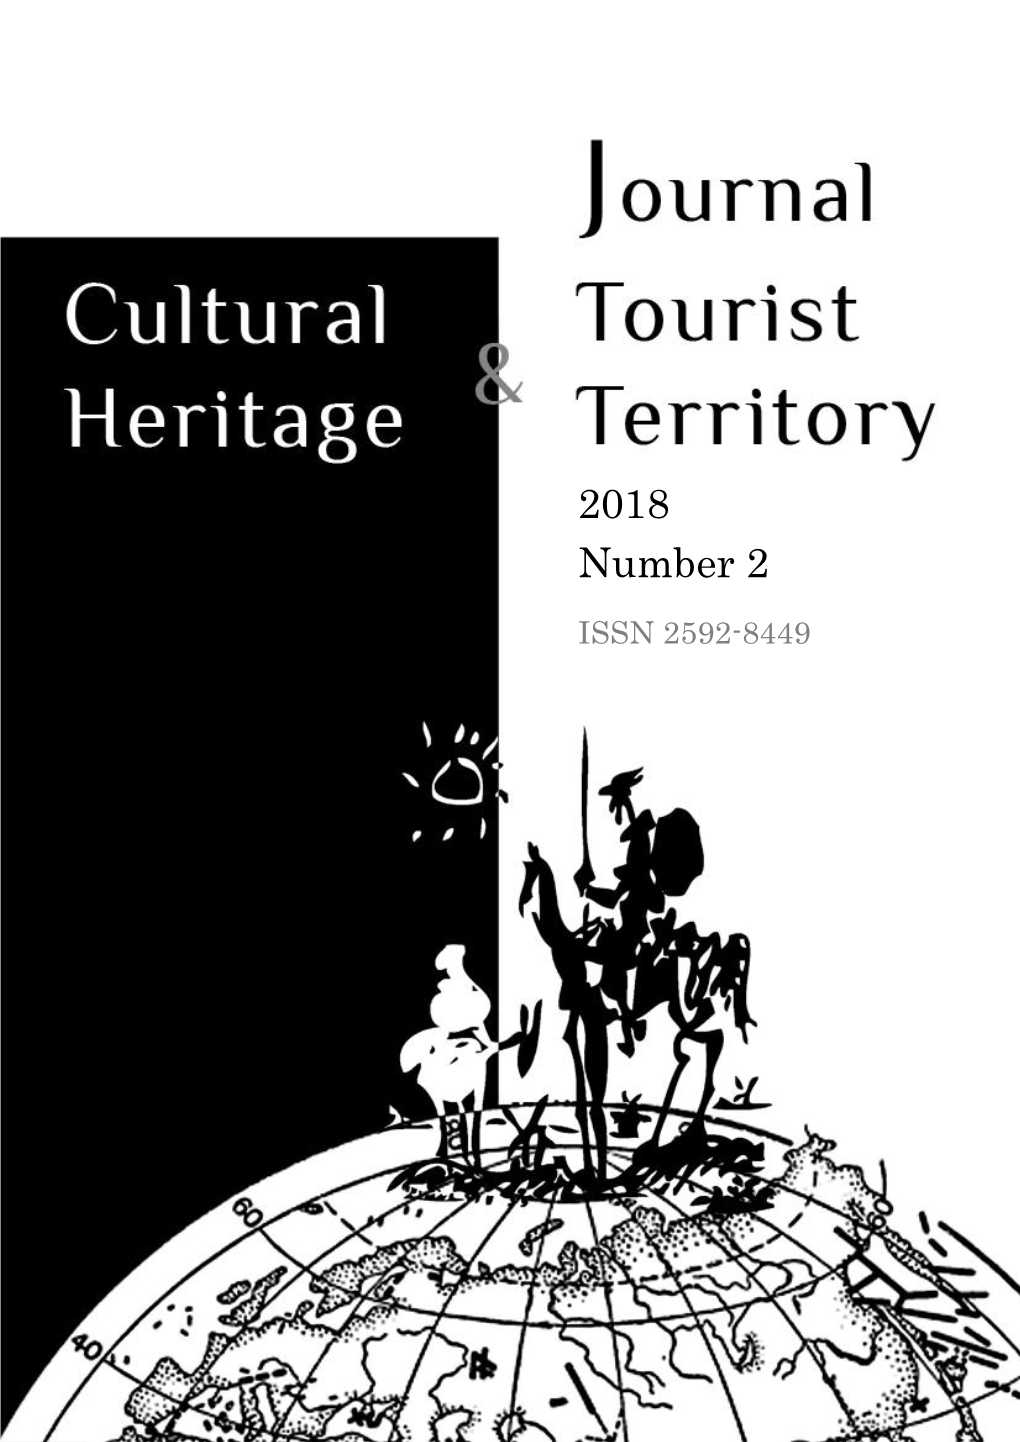 Journal Cultural Heritage & Tourist Territory 2018 Nr.2